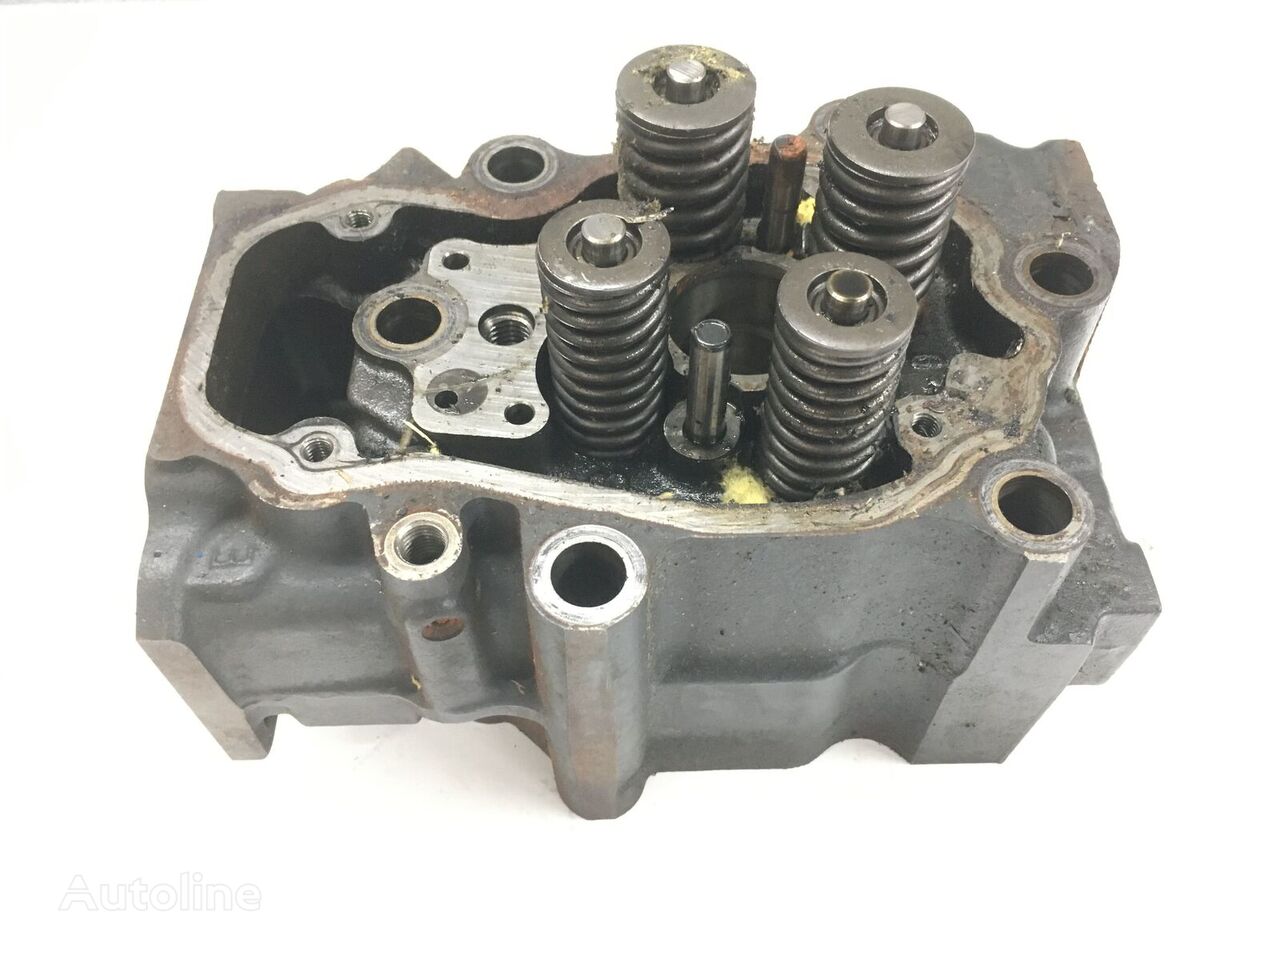 Scania DC 16 XPI 2245533 / 575999 cylinder head for truck